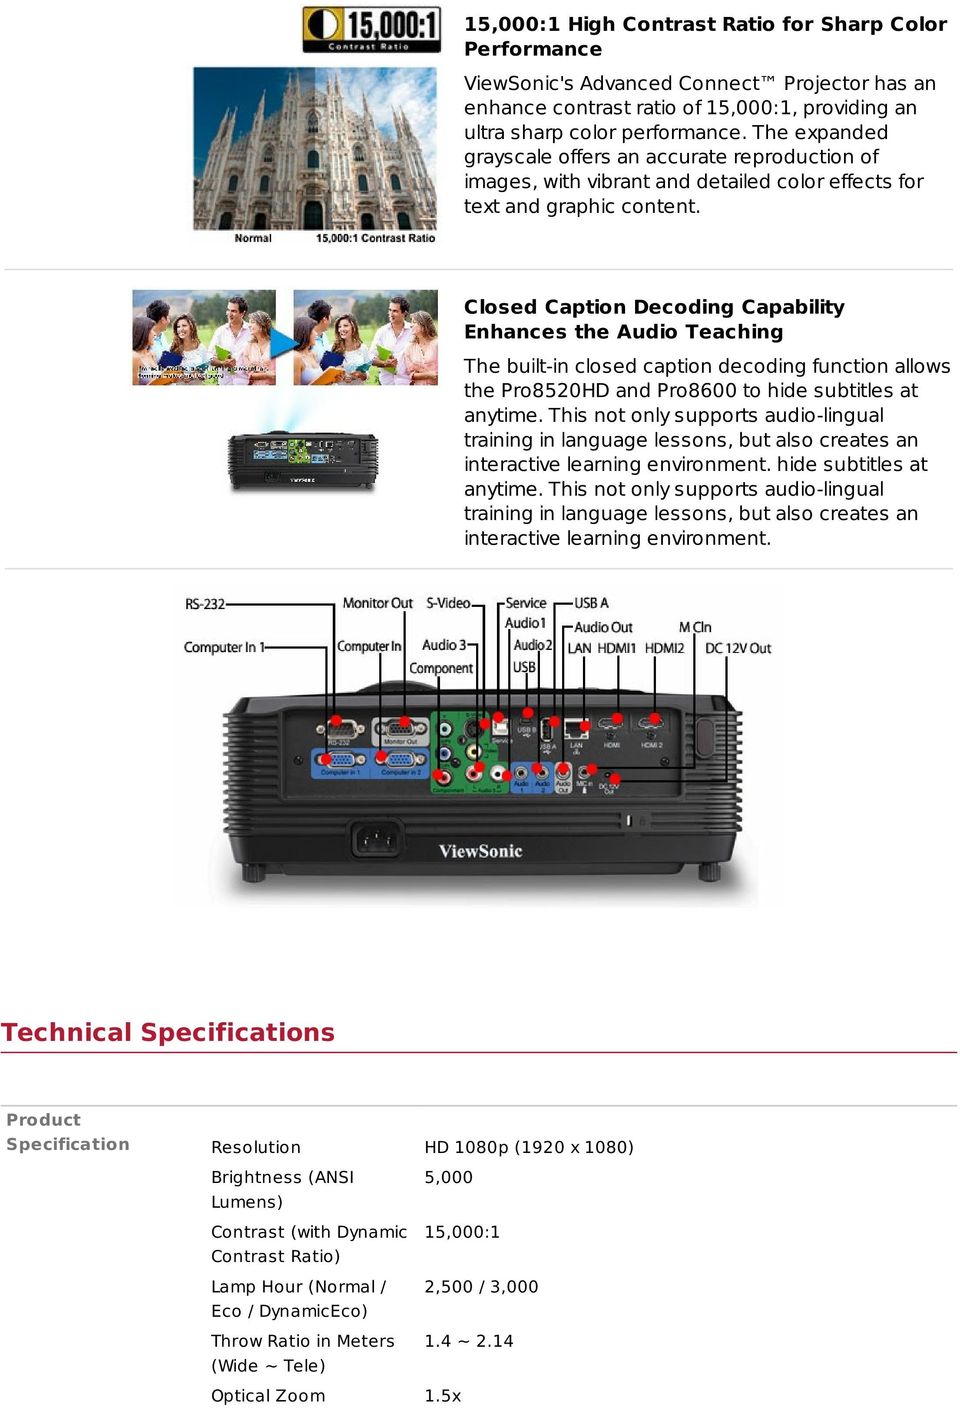 Closed Caption Decoding Capability Enhances the Audio Teaching The built-in closed caption decoding function allows the Pro8520HD and Pro8600 to hide subtitles at anytime.